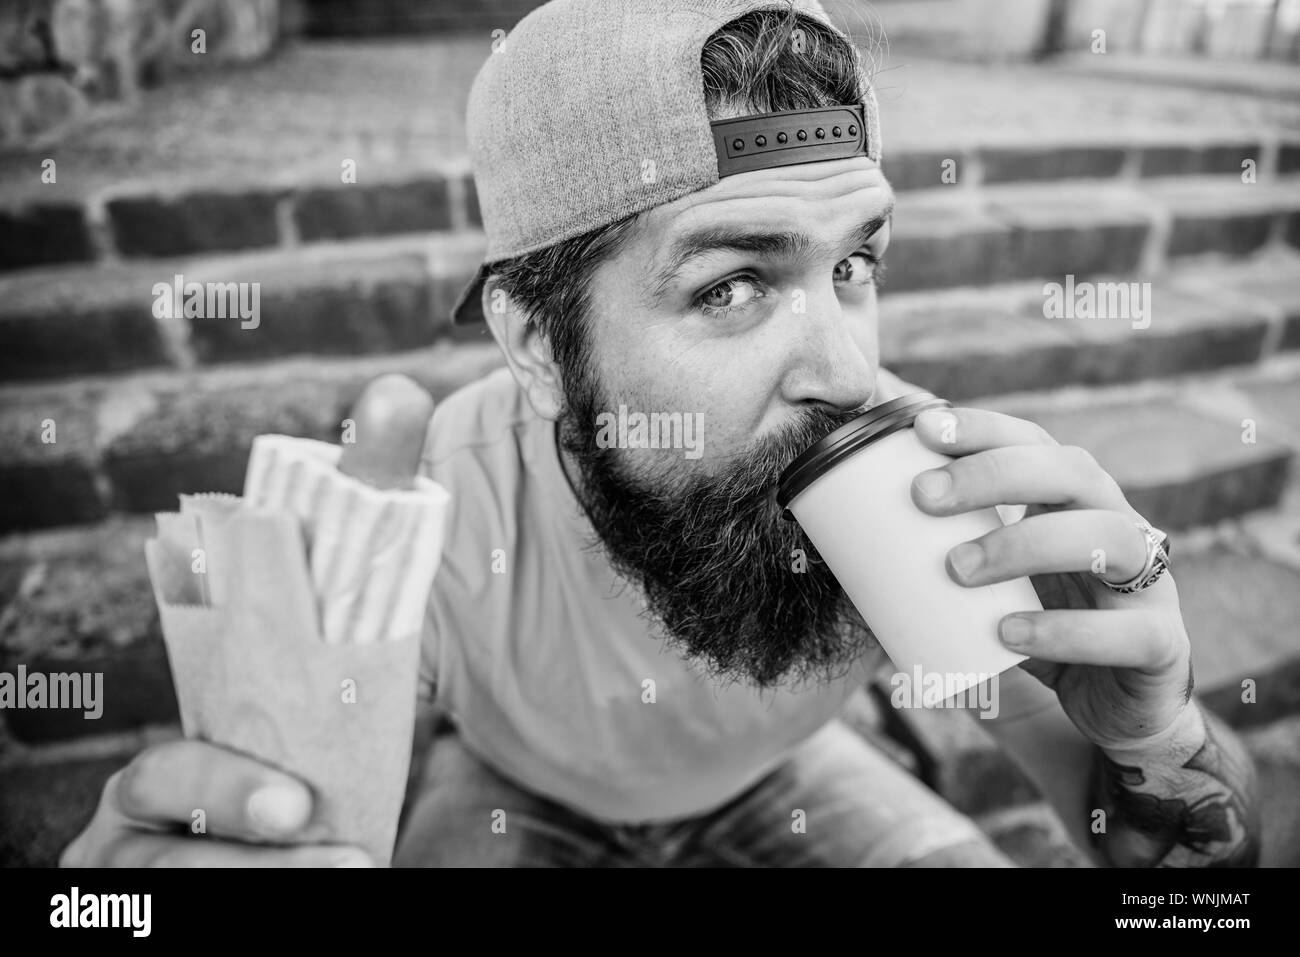 Junk food. Carefree hipster eat junk food while sit stairs. Snack for good mood. Guy eating hot dog. Street food concept. Man bearded eat tasty sausage and drink paper cup. Urban lifestyle nutrition. Stock Photo